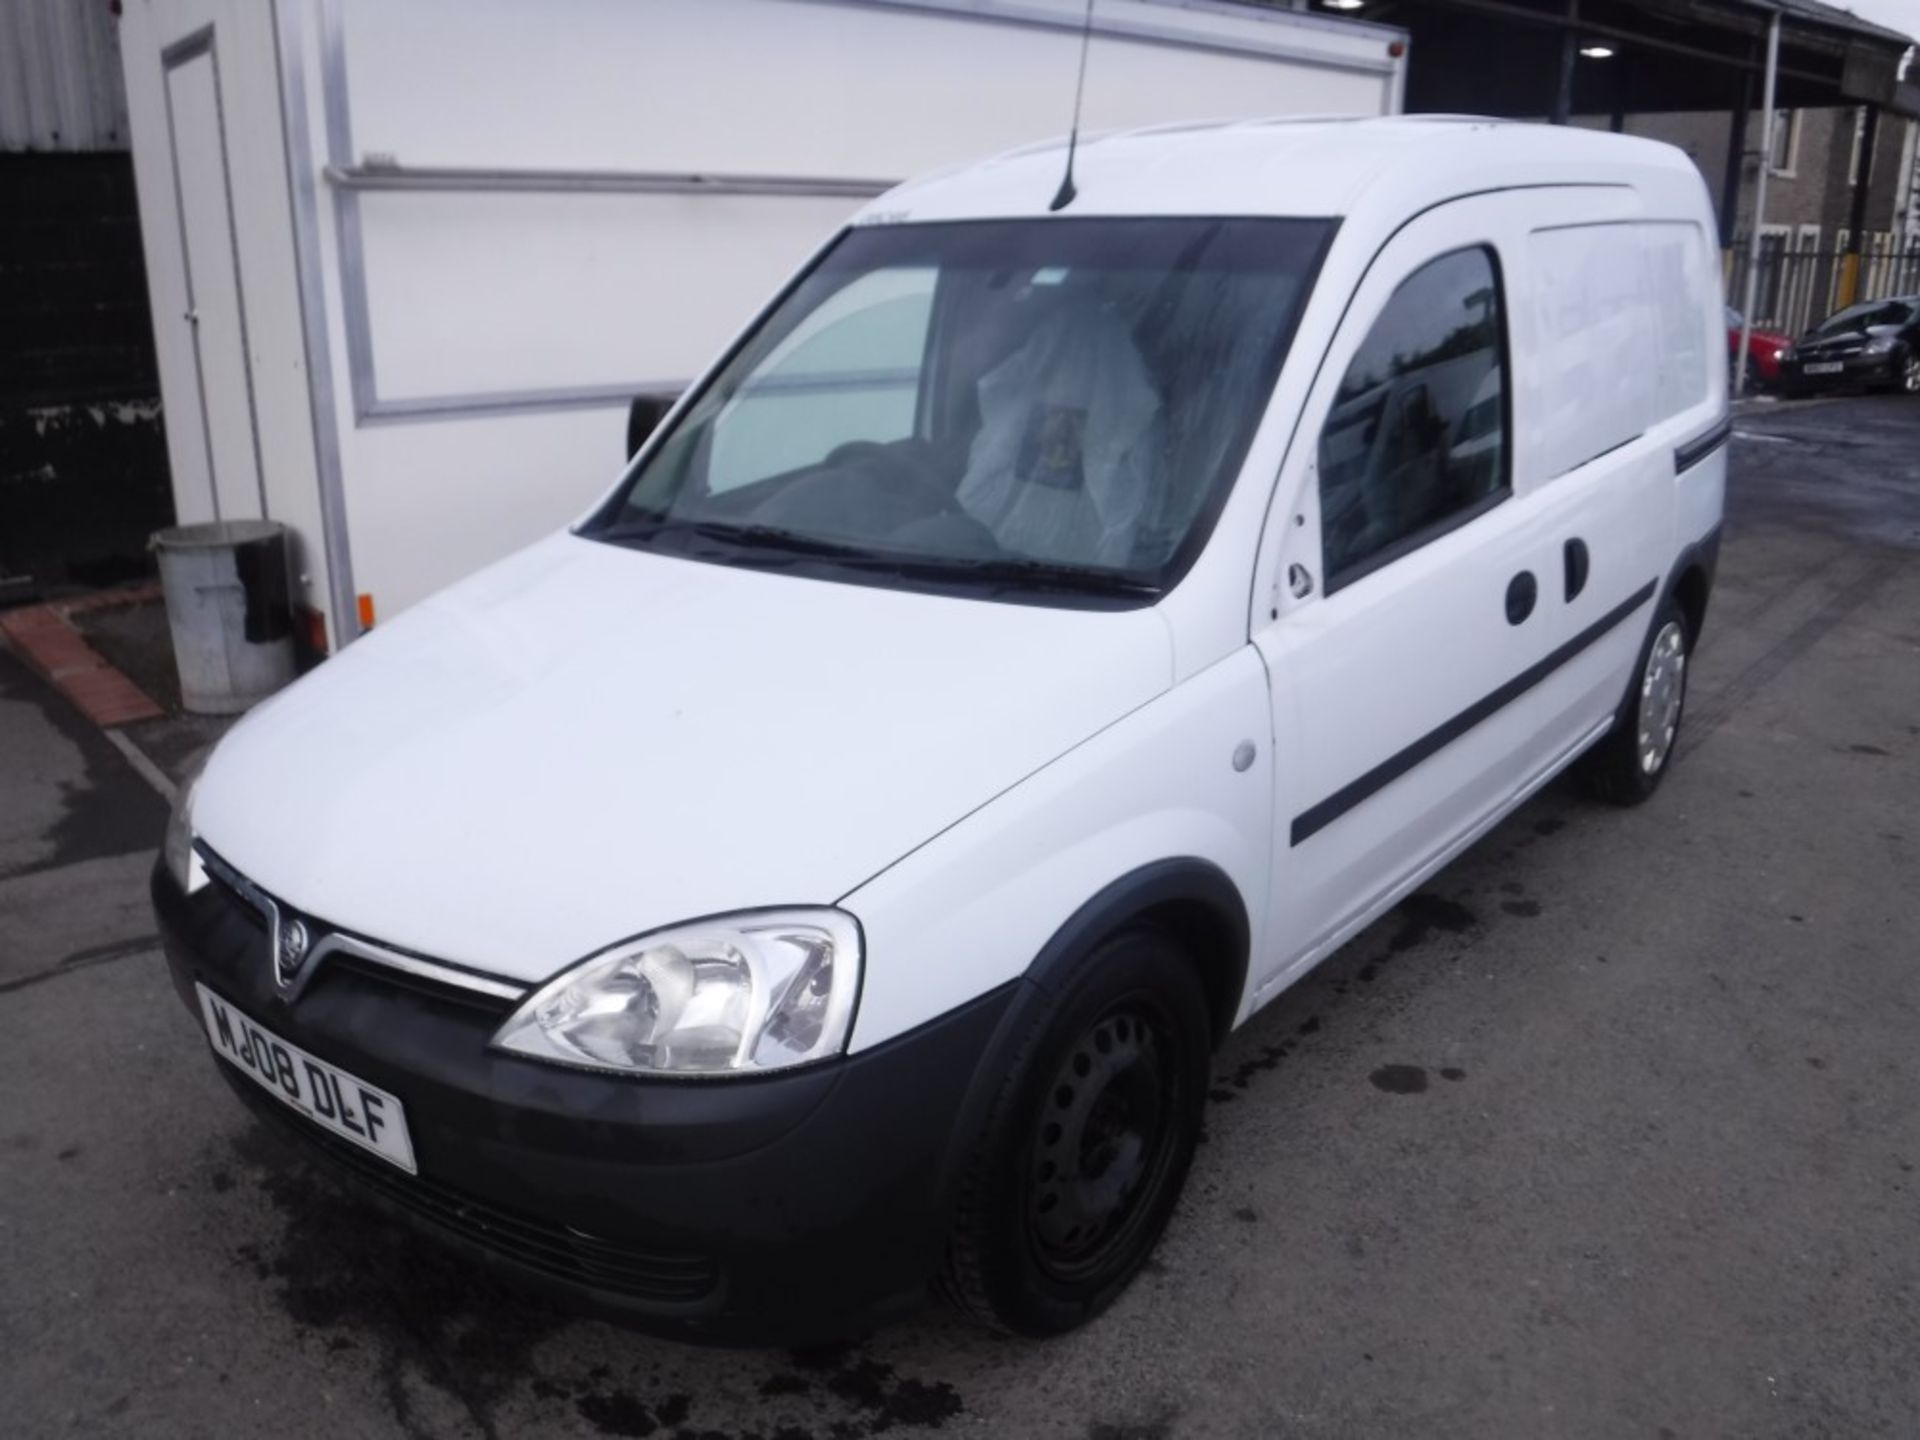 08 reg VAUXHALL COMBO 2000 CDTI VAN (DIRECT ELECTRICITY NW) 1ST REG 04/08, 107616M, V5 HERE, 1 - Image 2 of 5